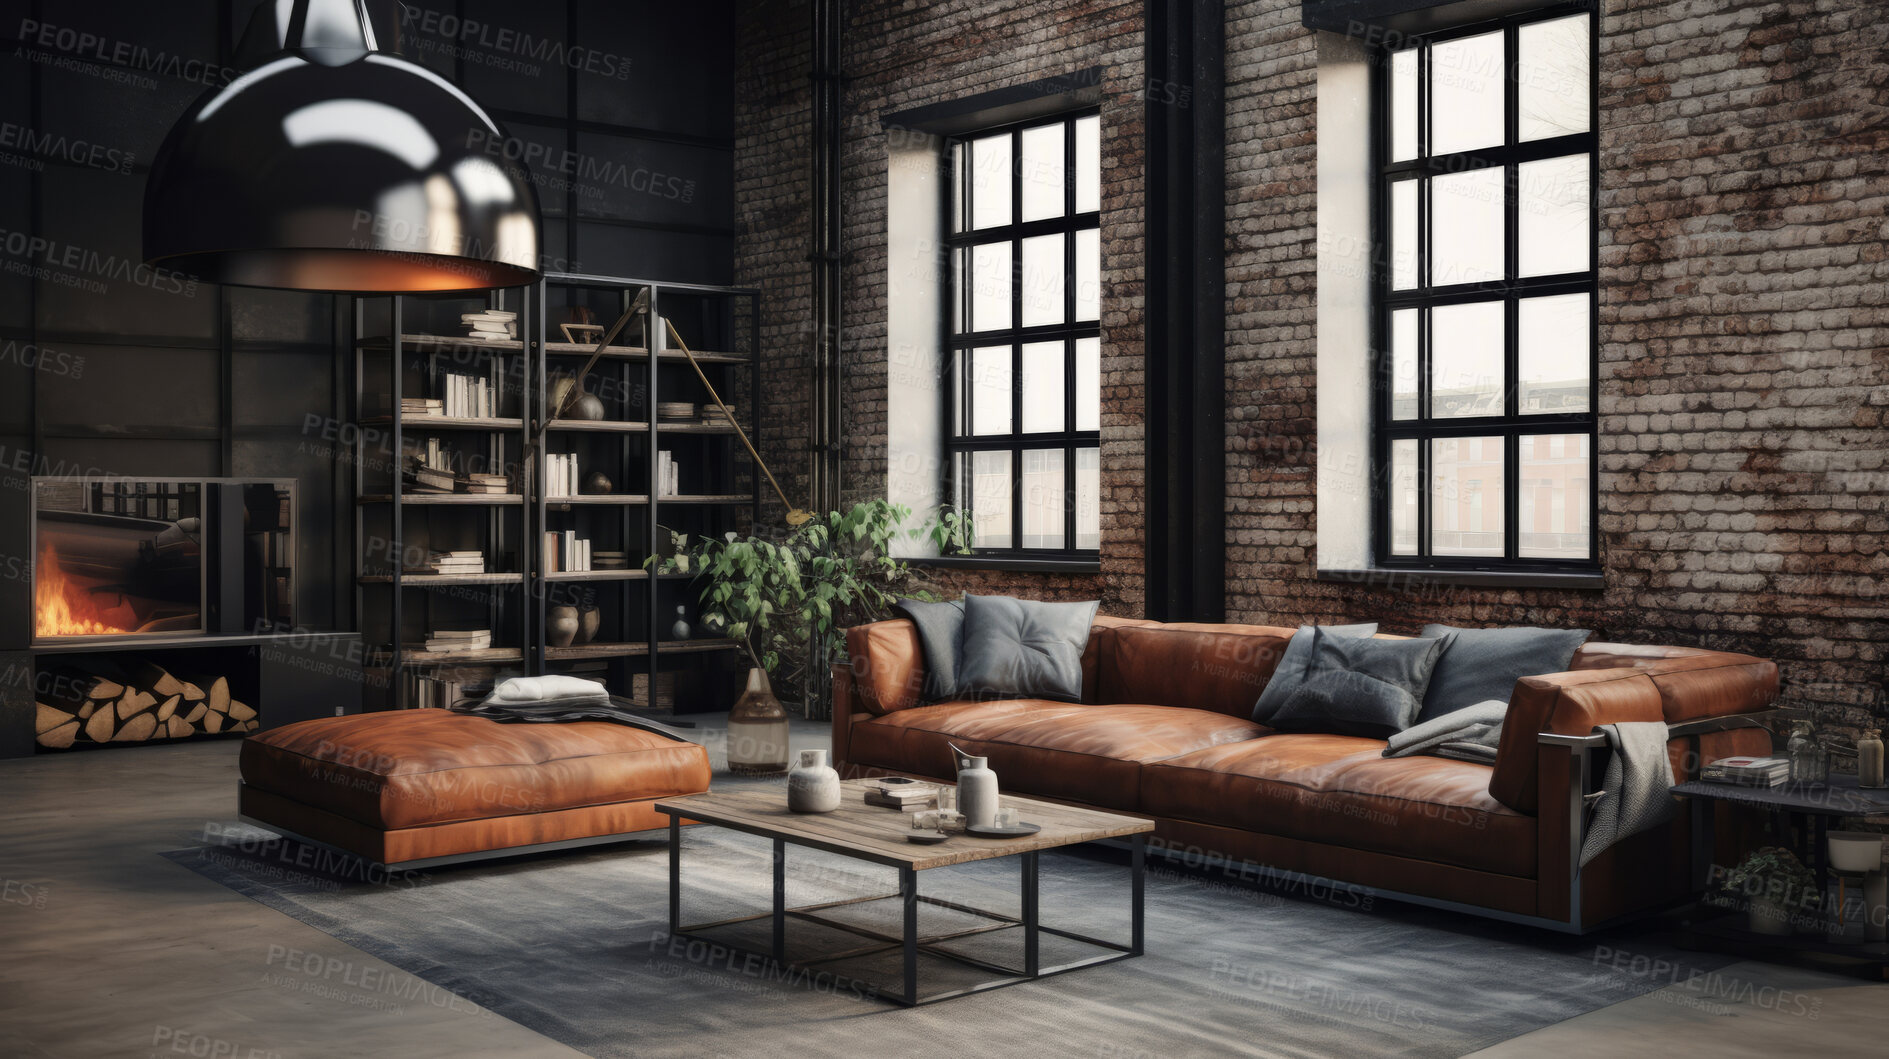 Buy stock photo Industrial style living room. Luxury living. Modern interior design concept.